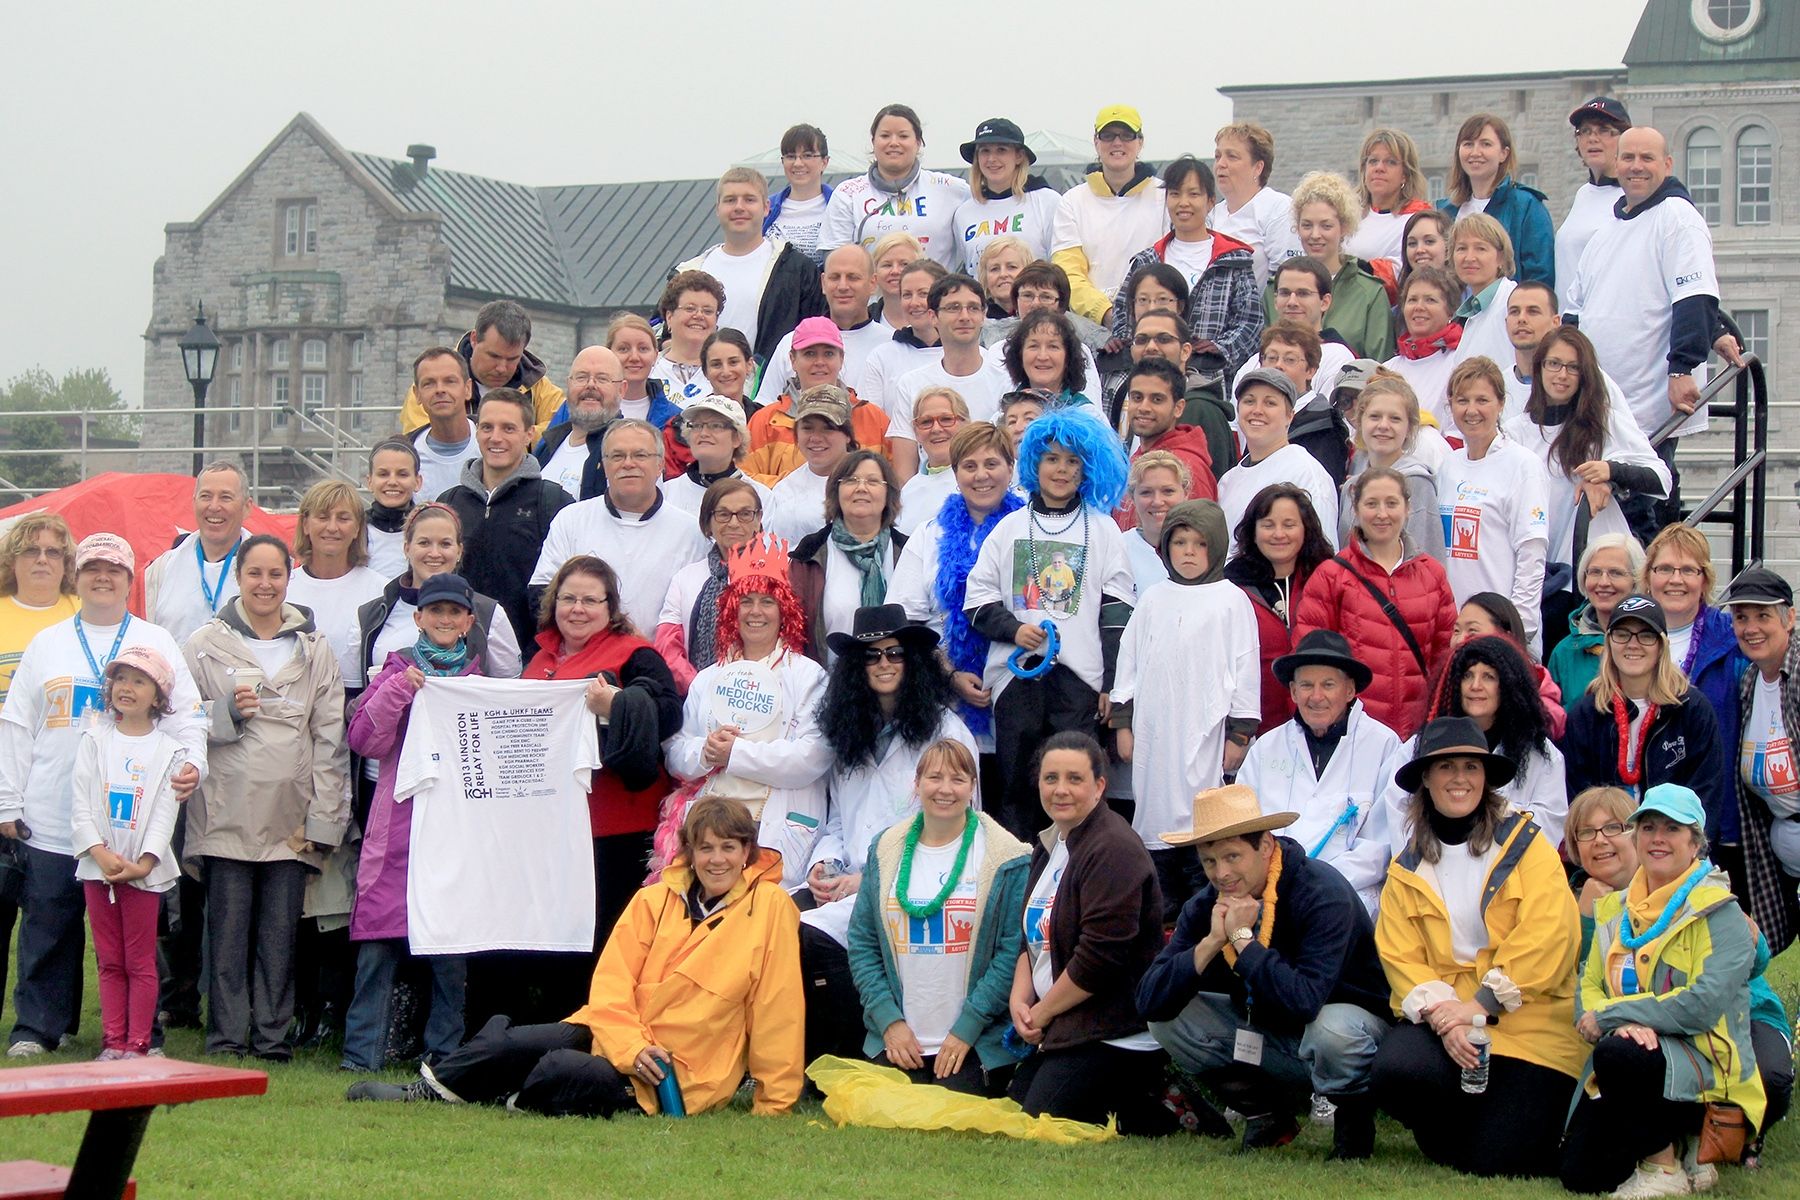 KGH group photo at Kingston Relay for Life